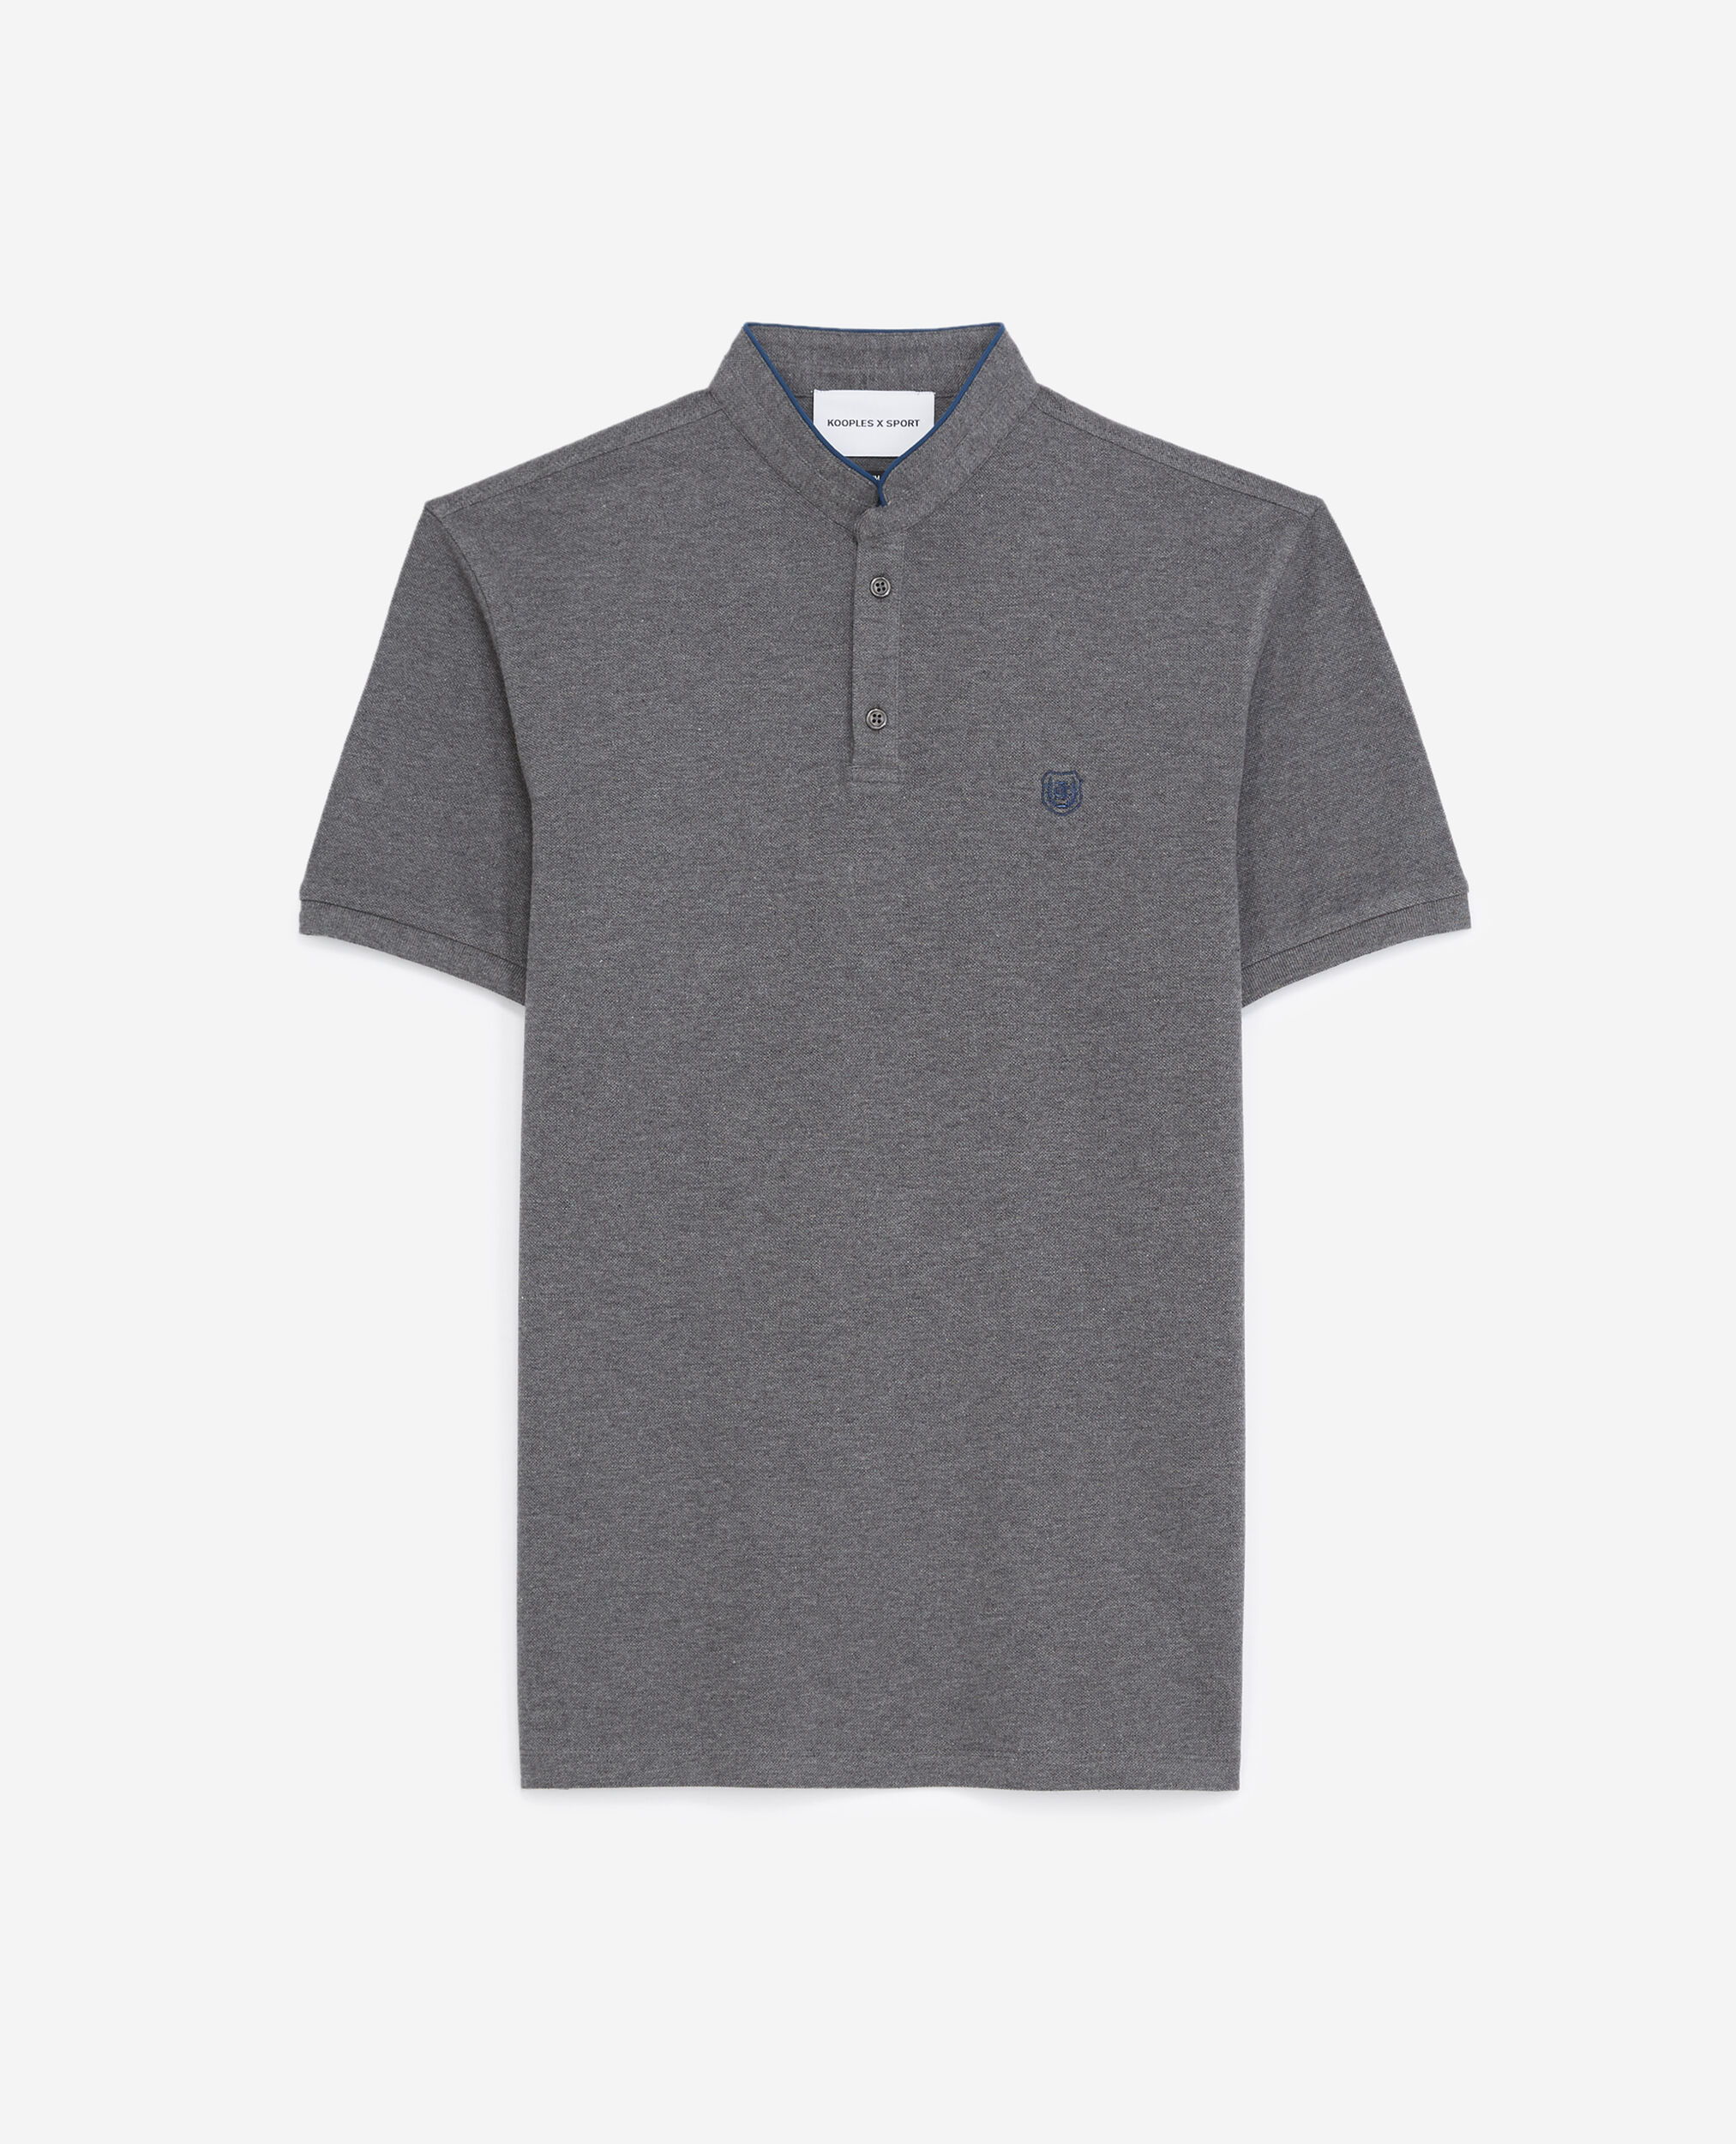 Gray polo shirt, MID GREY / PETROL BLUE, hi-res image number null